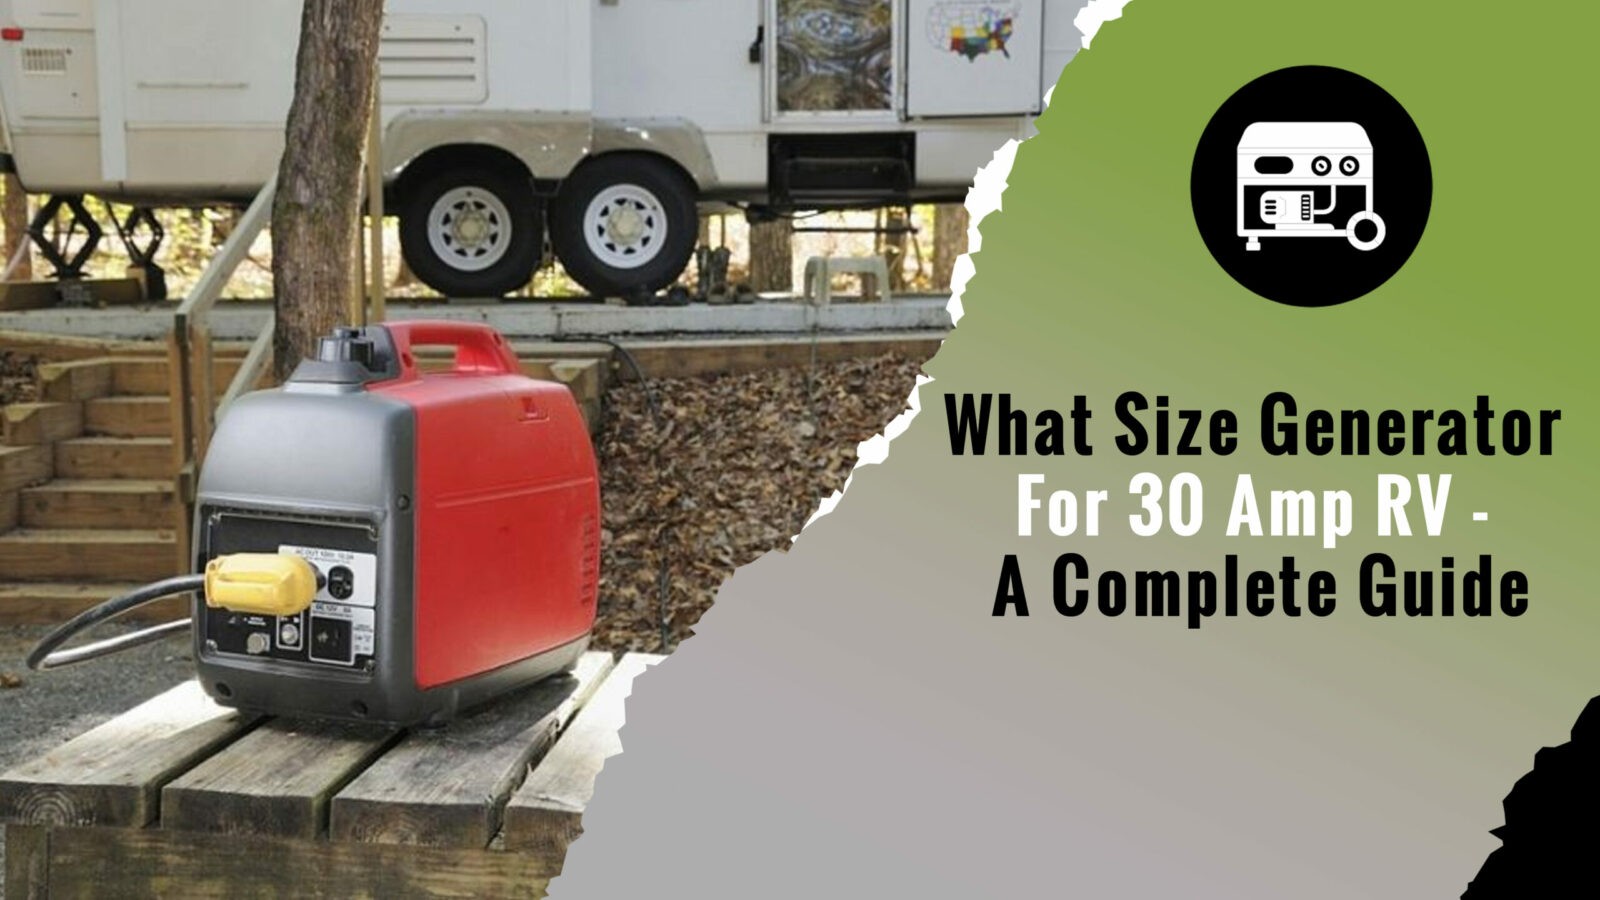 What Size Generator For 30 Amp RV - A Complete Guide